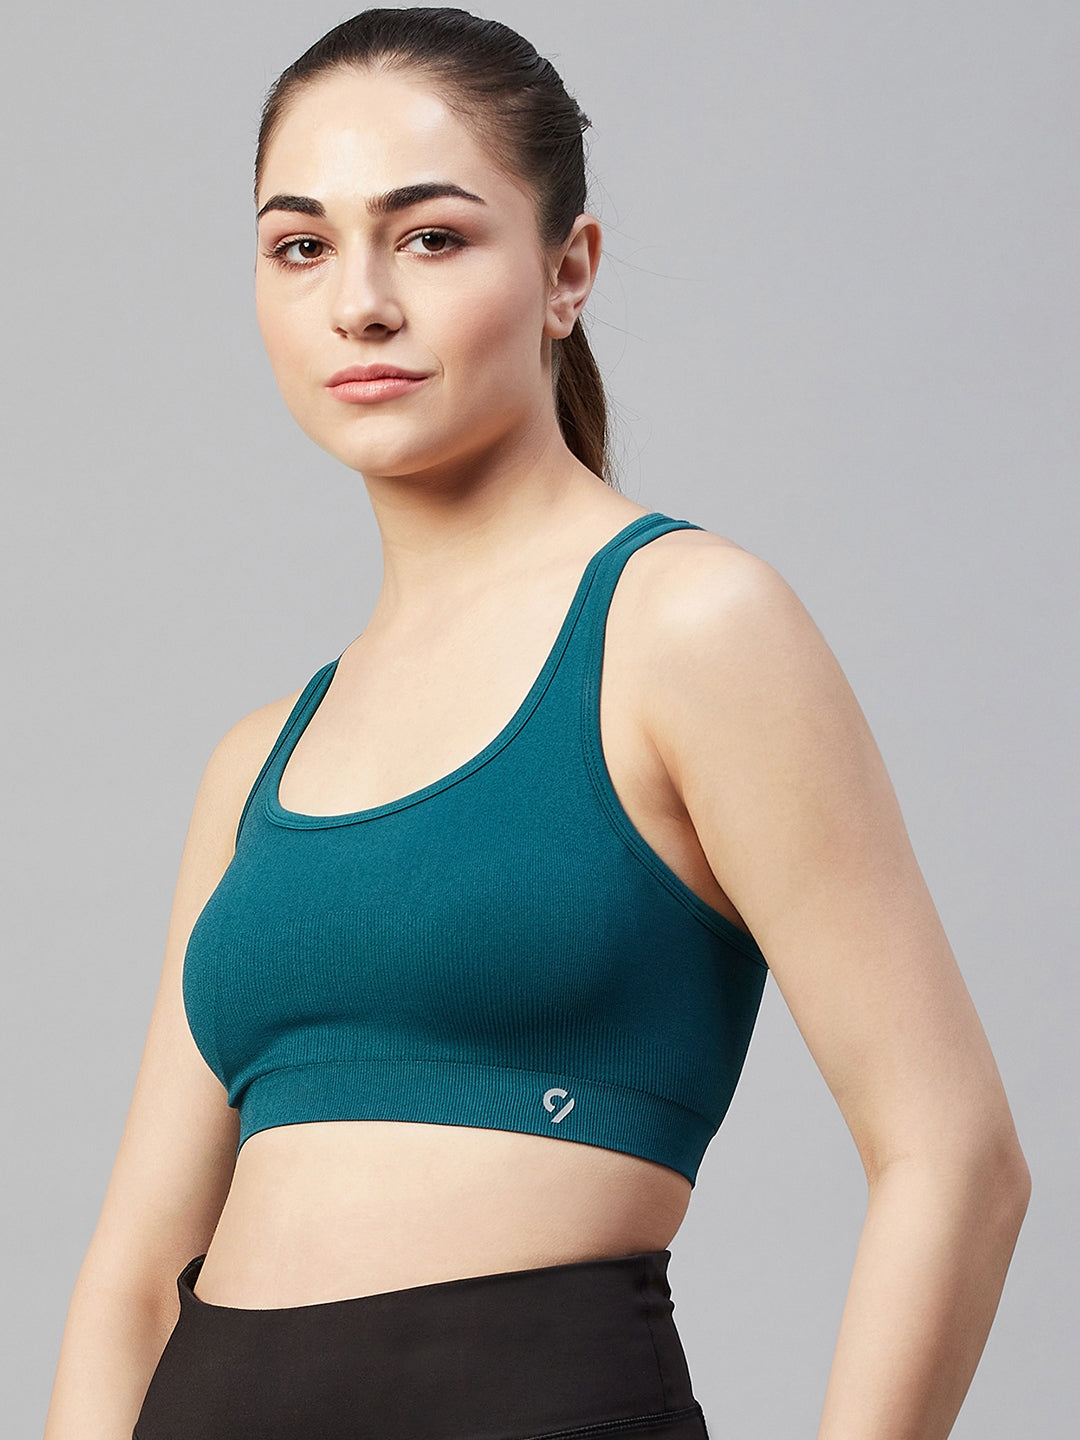 Ribbed Sports Bra For Women